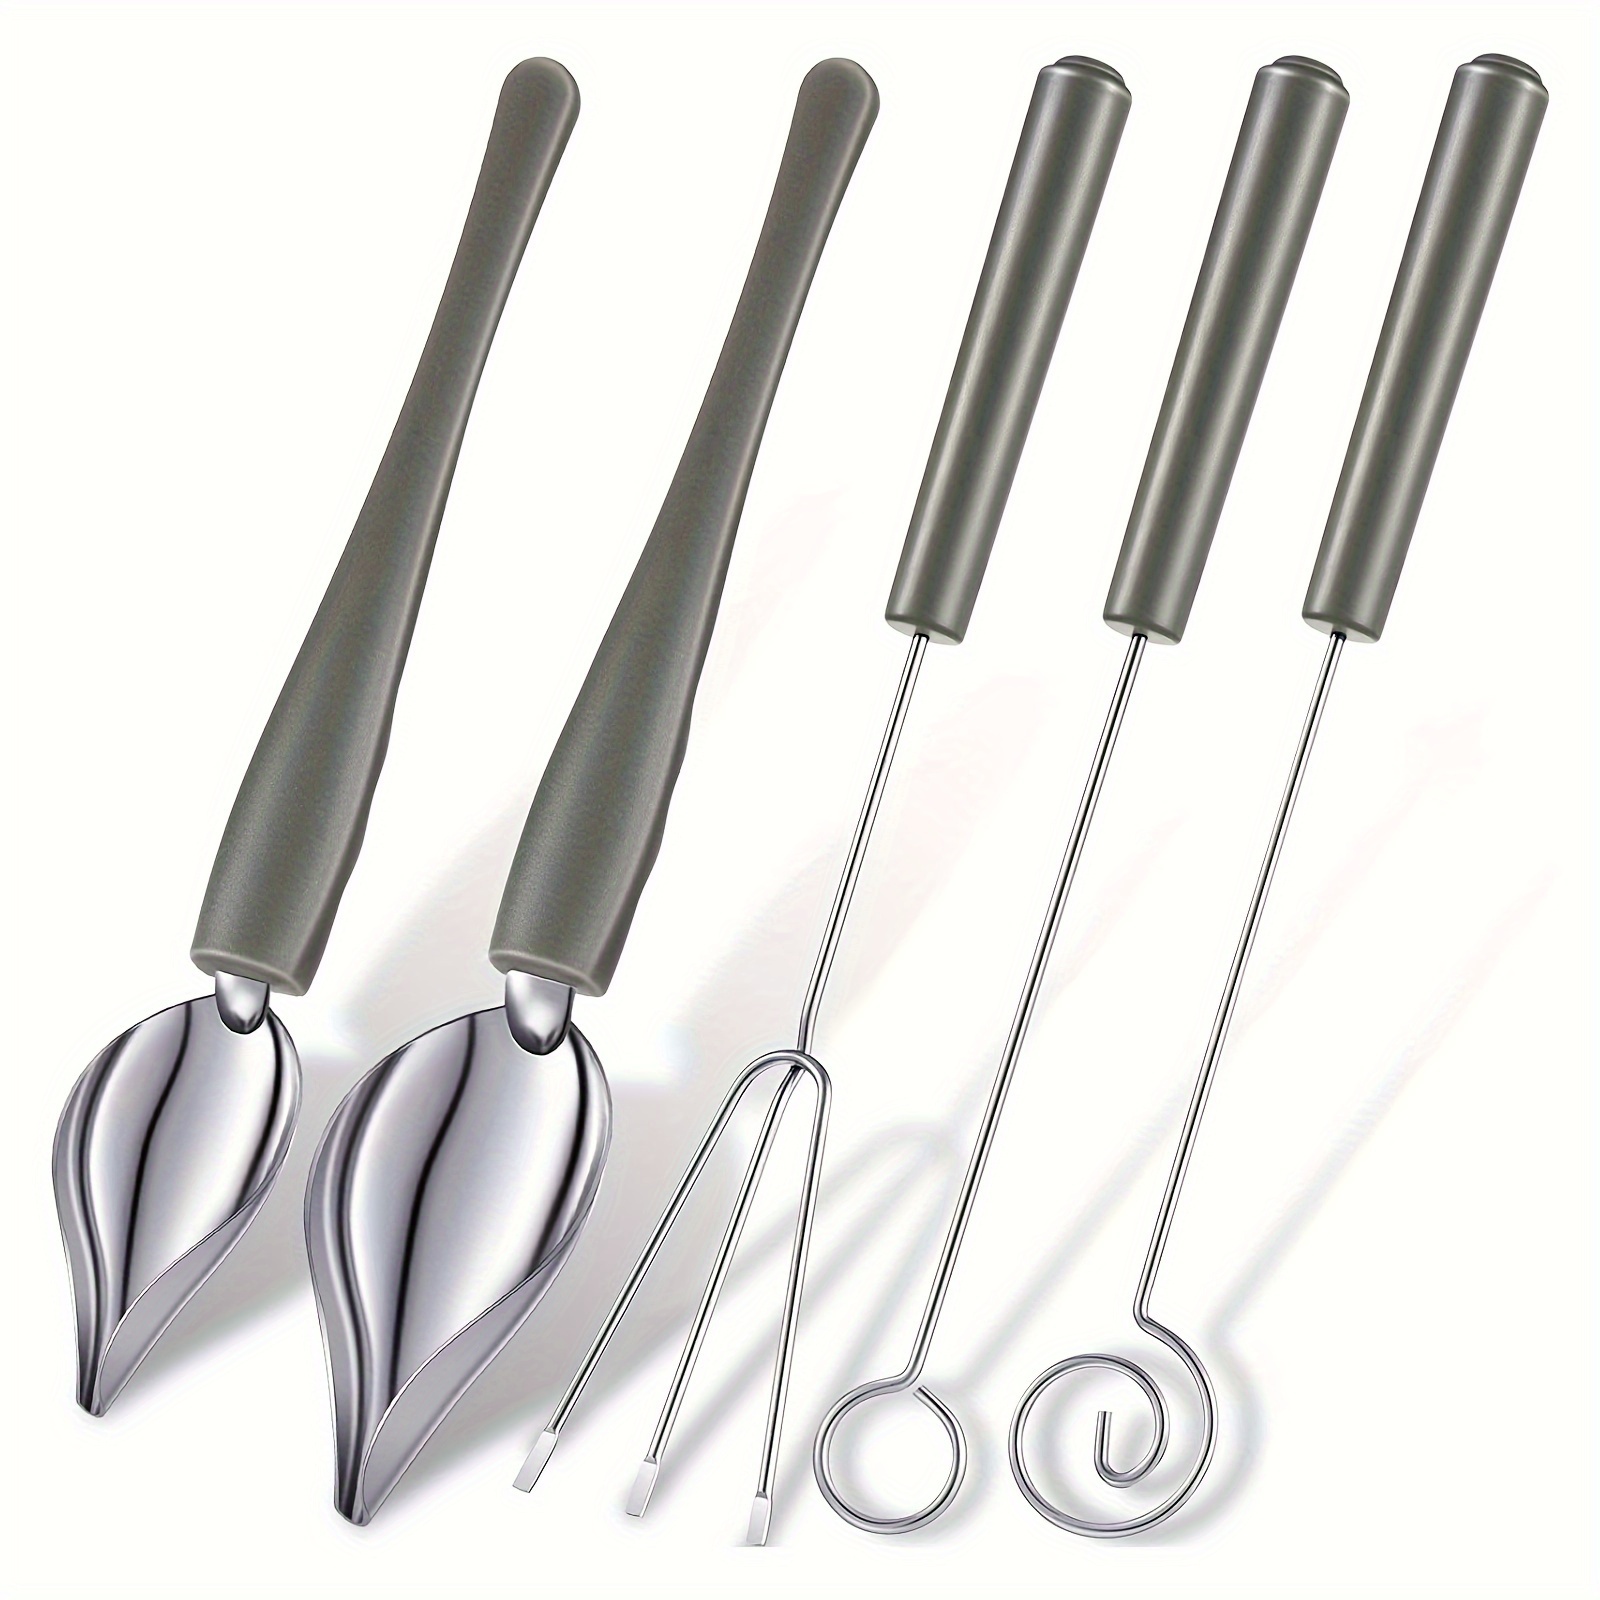 

5pcs Candy Dipping Tools Set, Stainless Steel Chocolate Fondue Forks & Spoons, Cooking Decorating Spoon, For Bakery Restaurant Use, Various Sizes